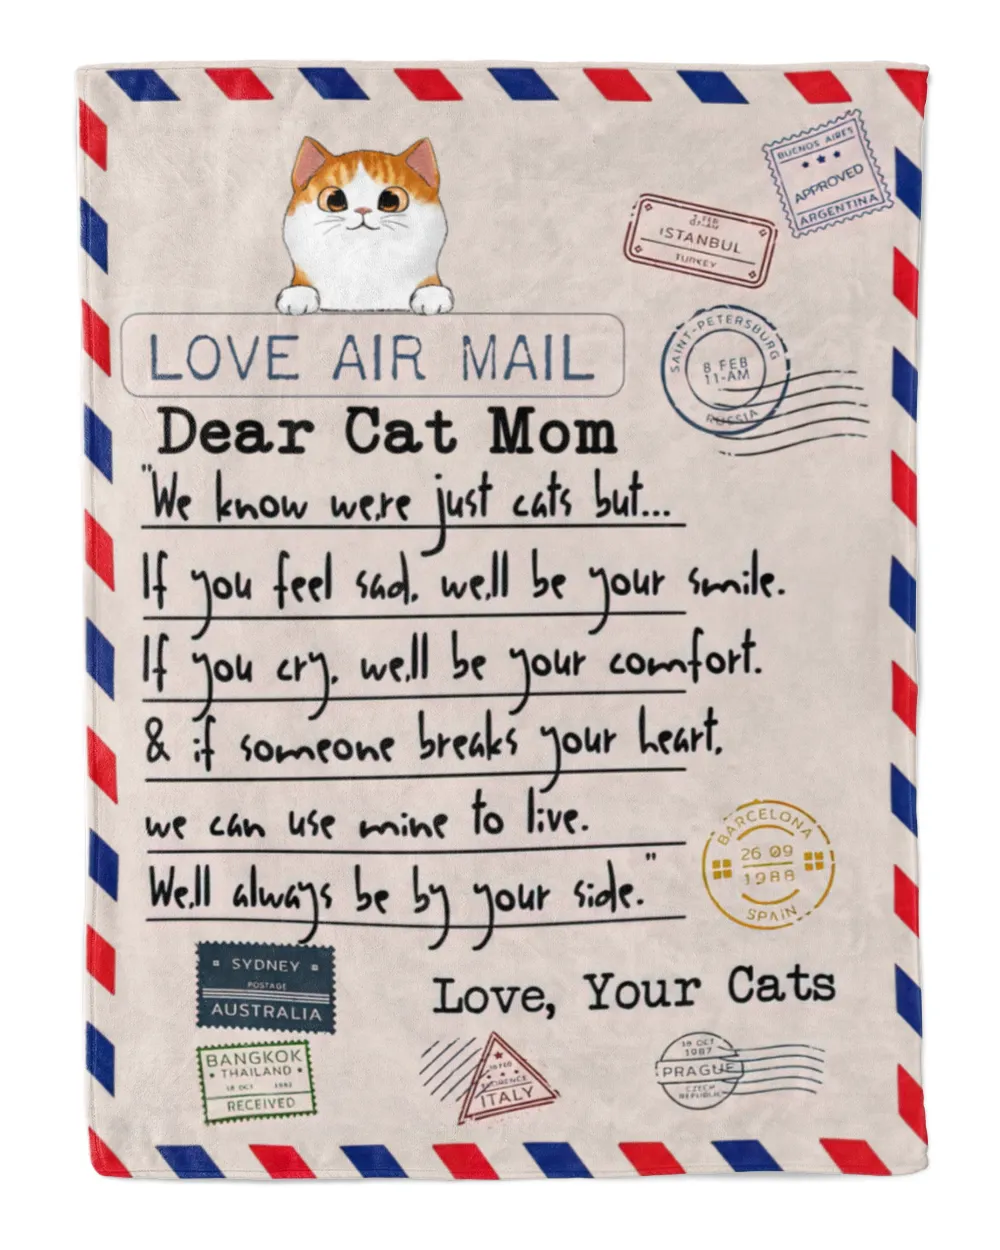 Personalized Blanket For Cat Mom, Cat Dad, Love Air Mail From Cat QTCAT120223BLKA1